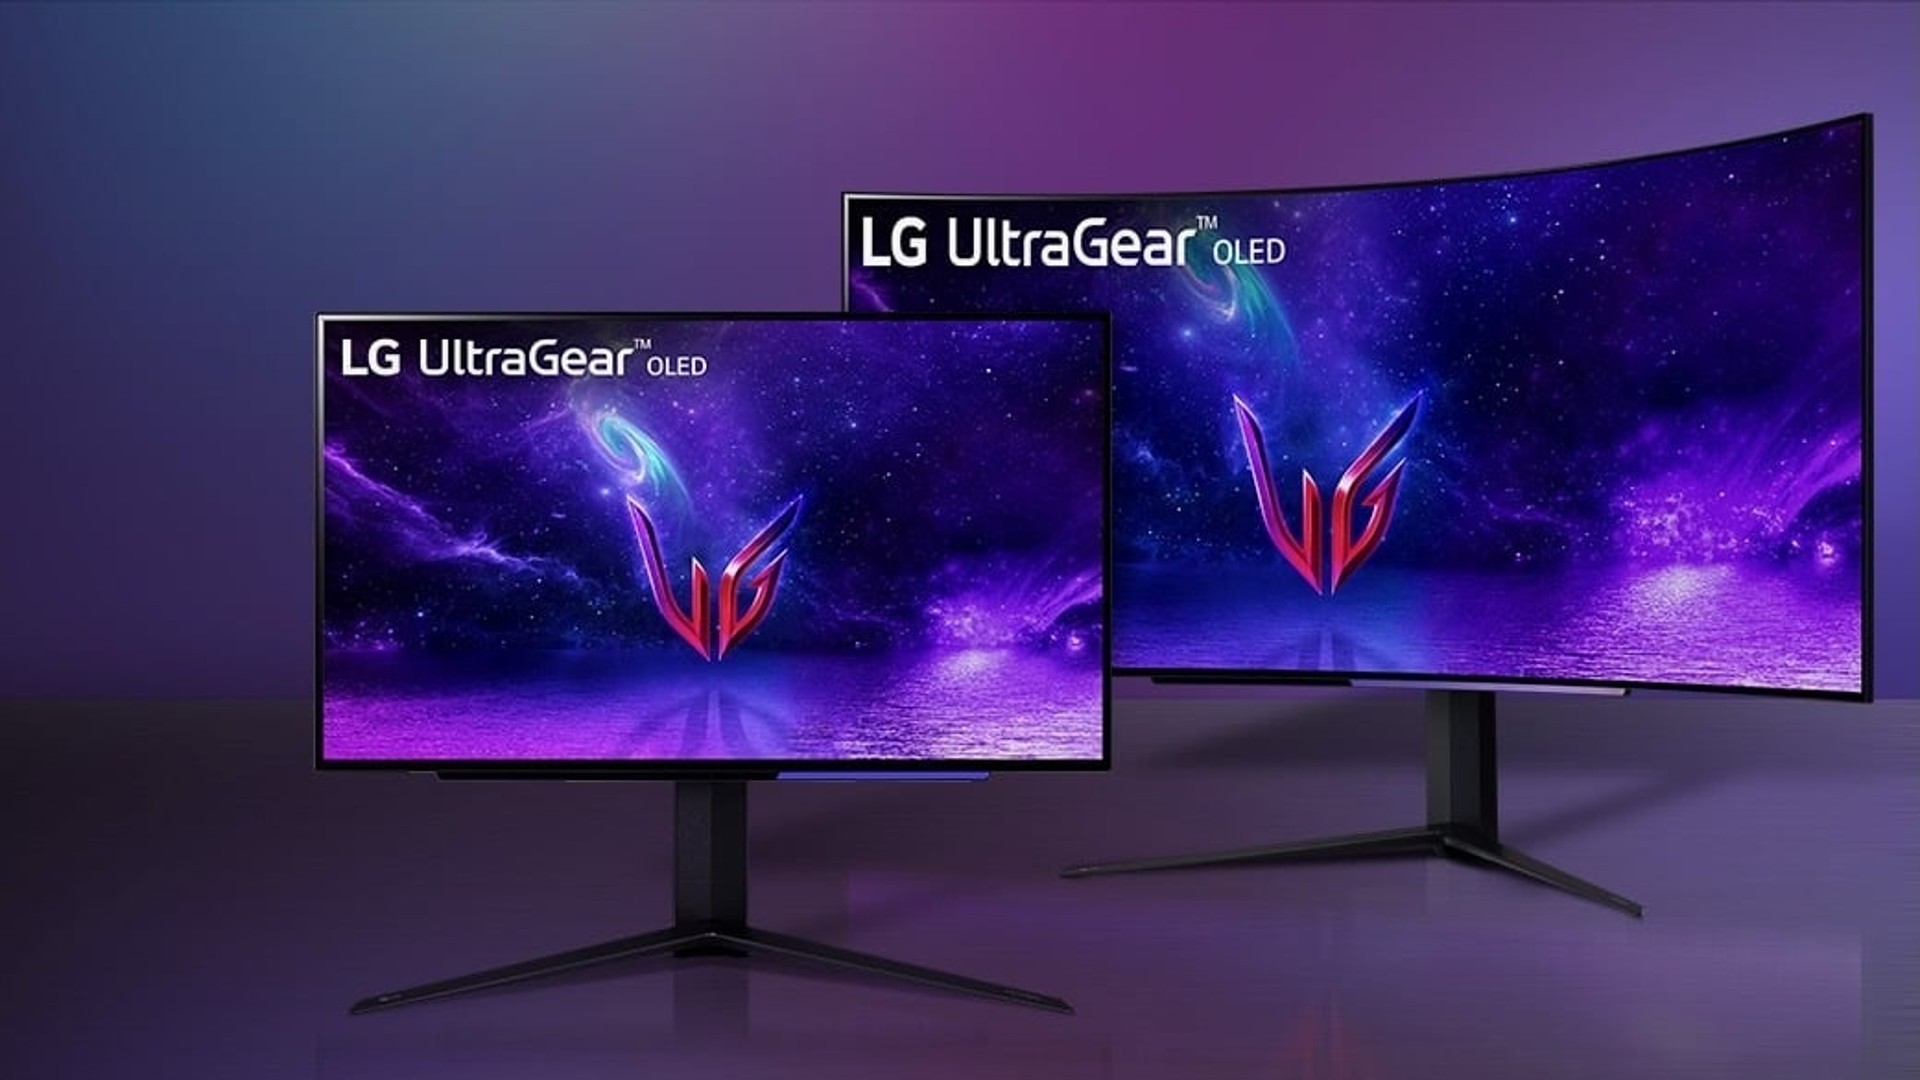 OLED gaming monitor prices could drop as LG invests $1 billion